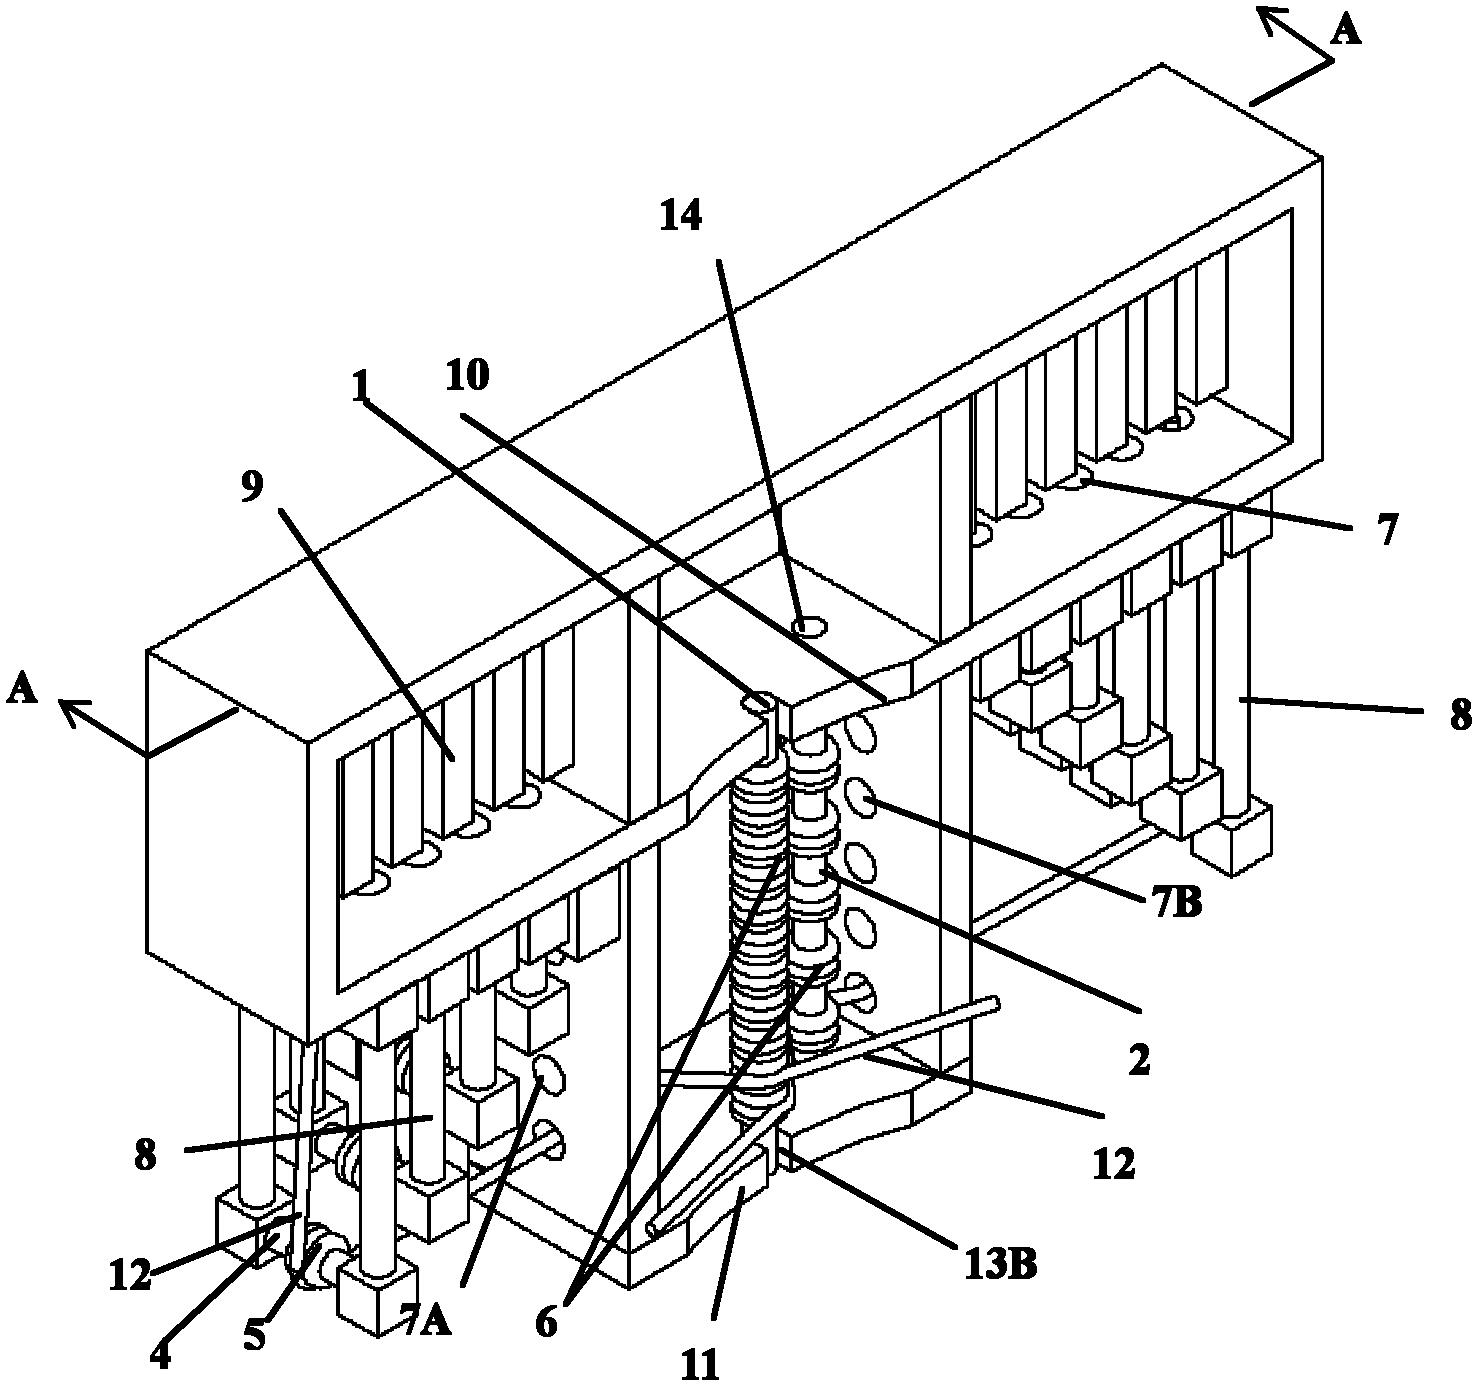 Simulated water pressure loading device and method used for tunnel structure test